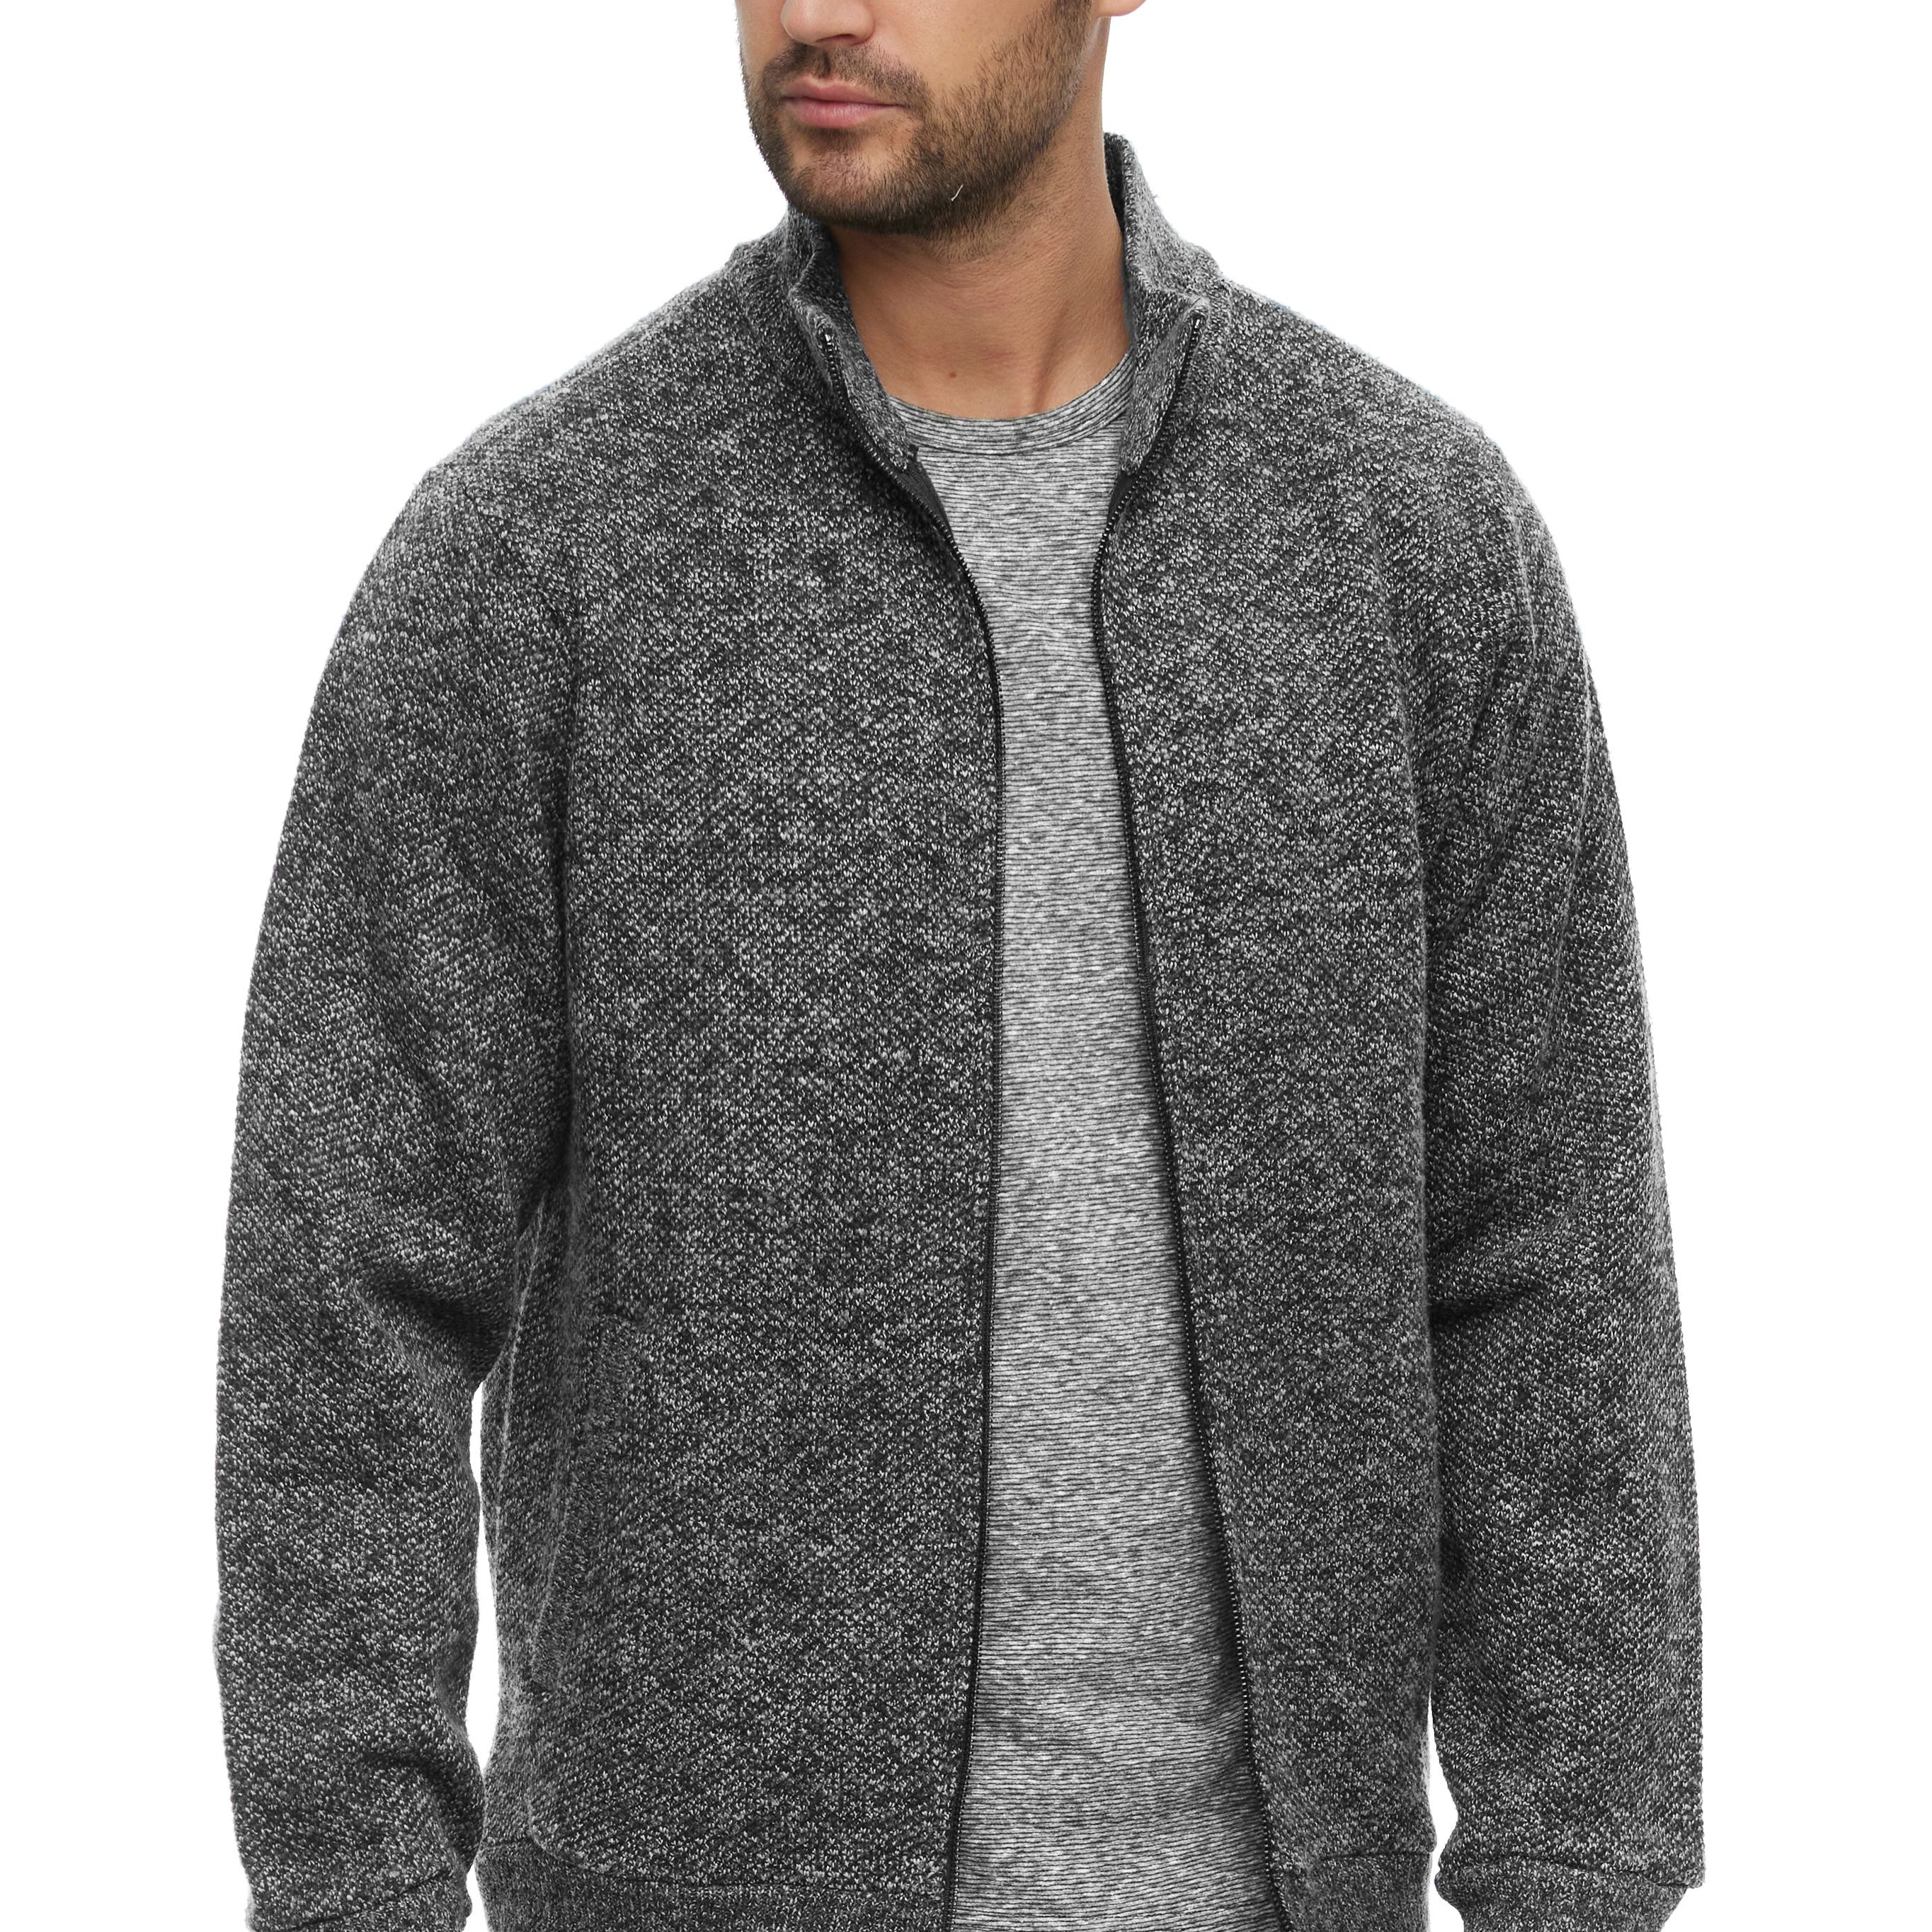 Rhineland Full Zip Mockneck Sweater-Men's Tops-Vixen Collection, Day Spa and Women's Boutique Located in Seattle, Washington